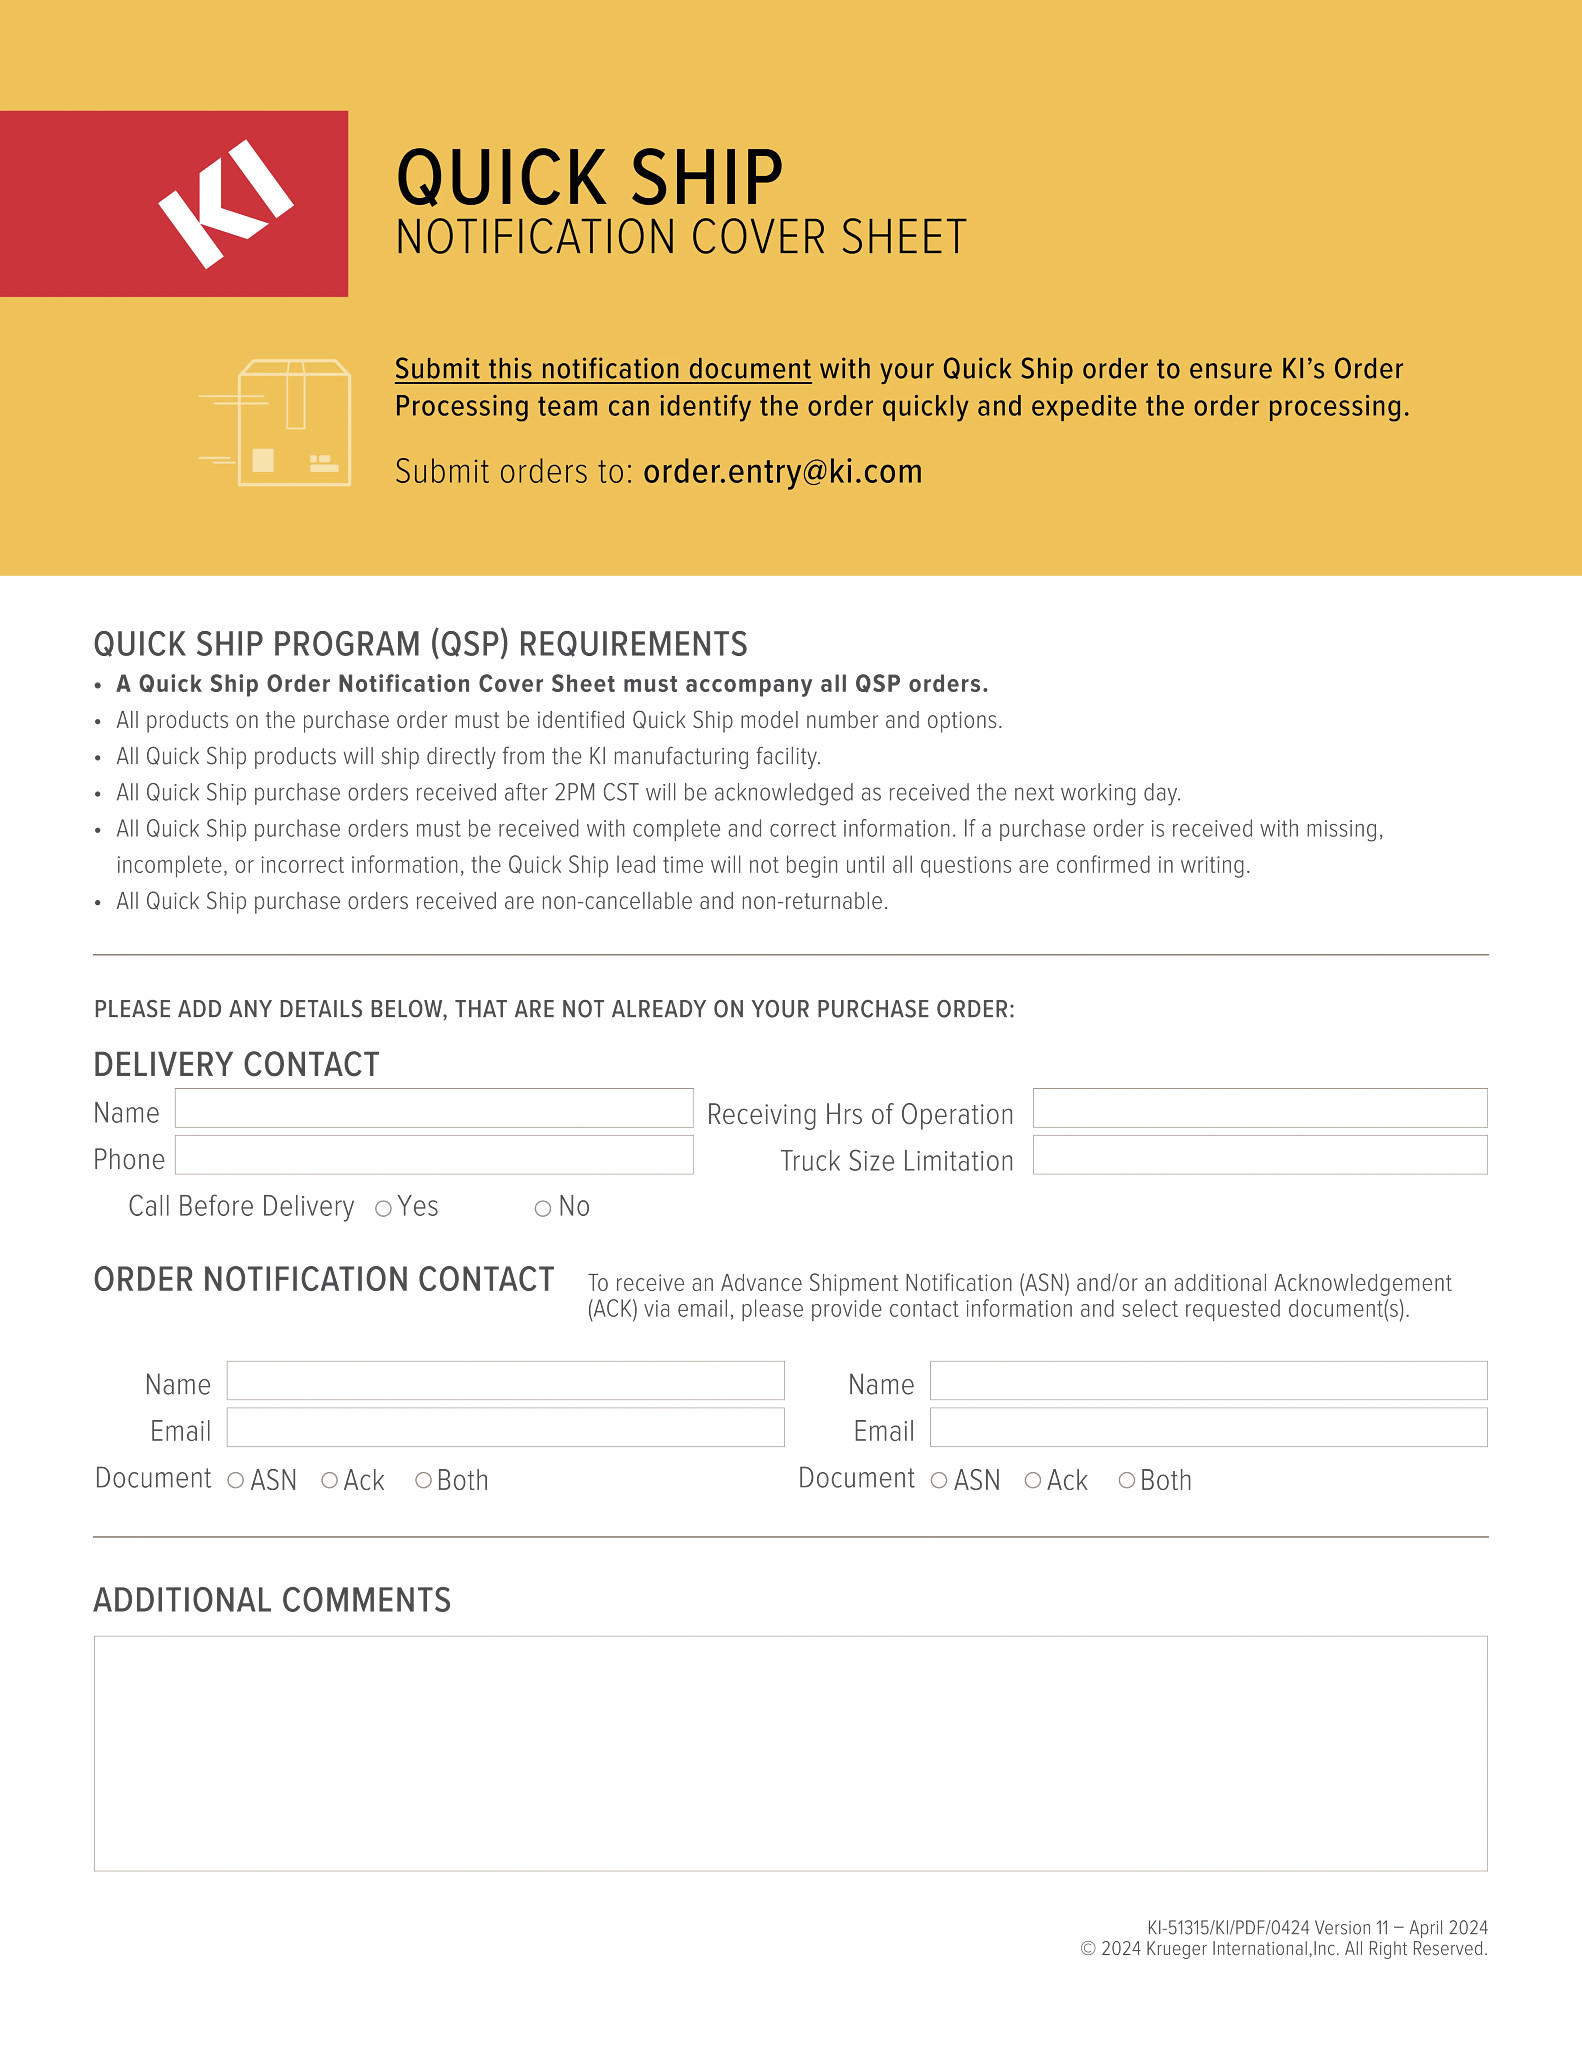 Quick Ship Purchase Order Cover